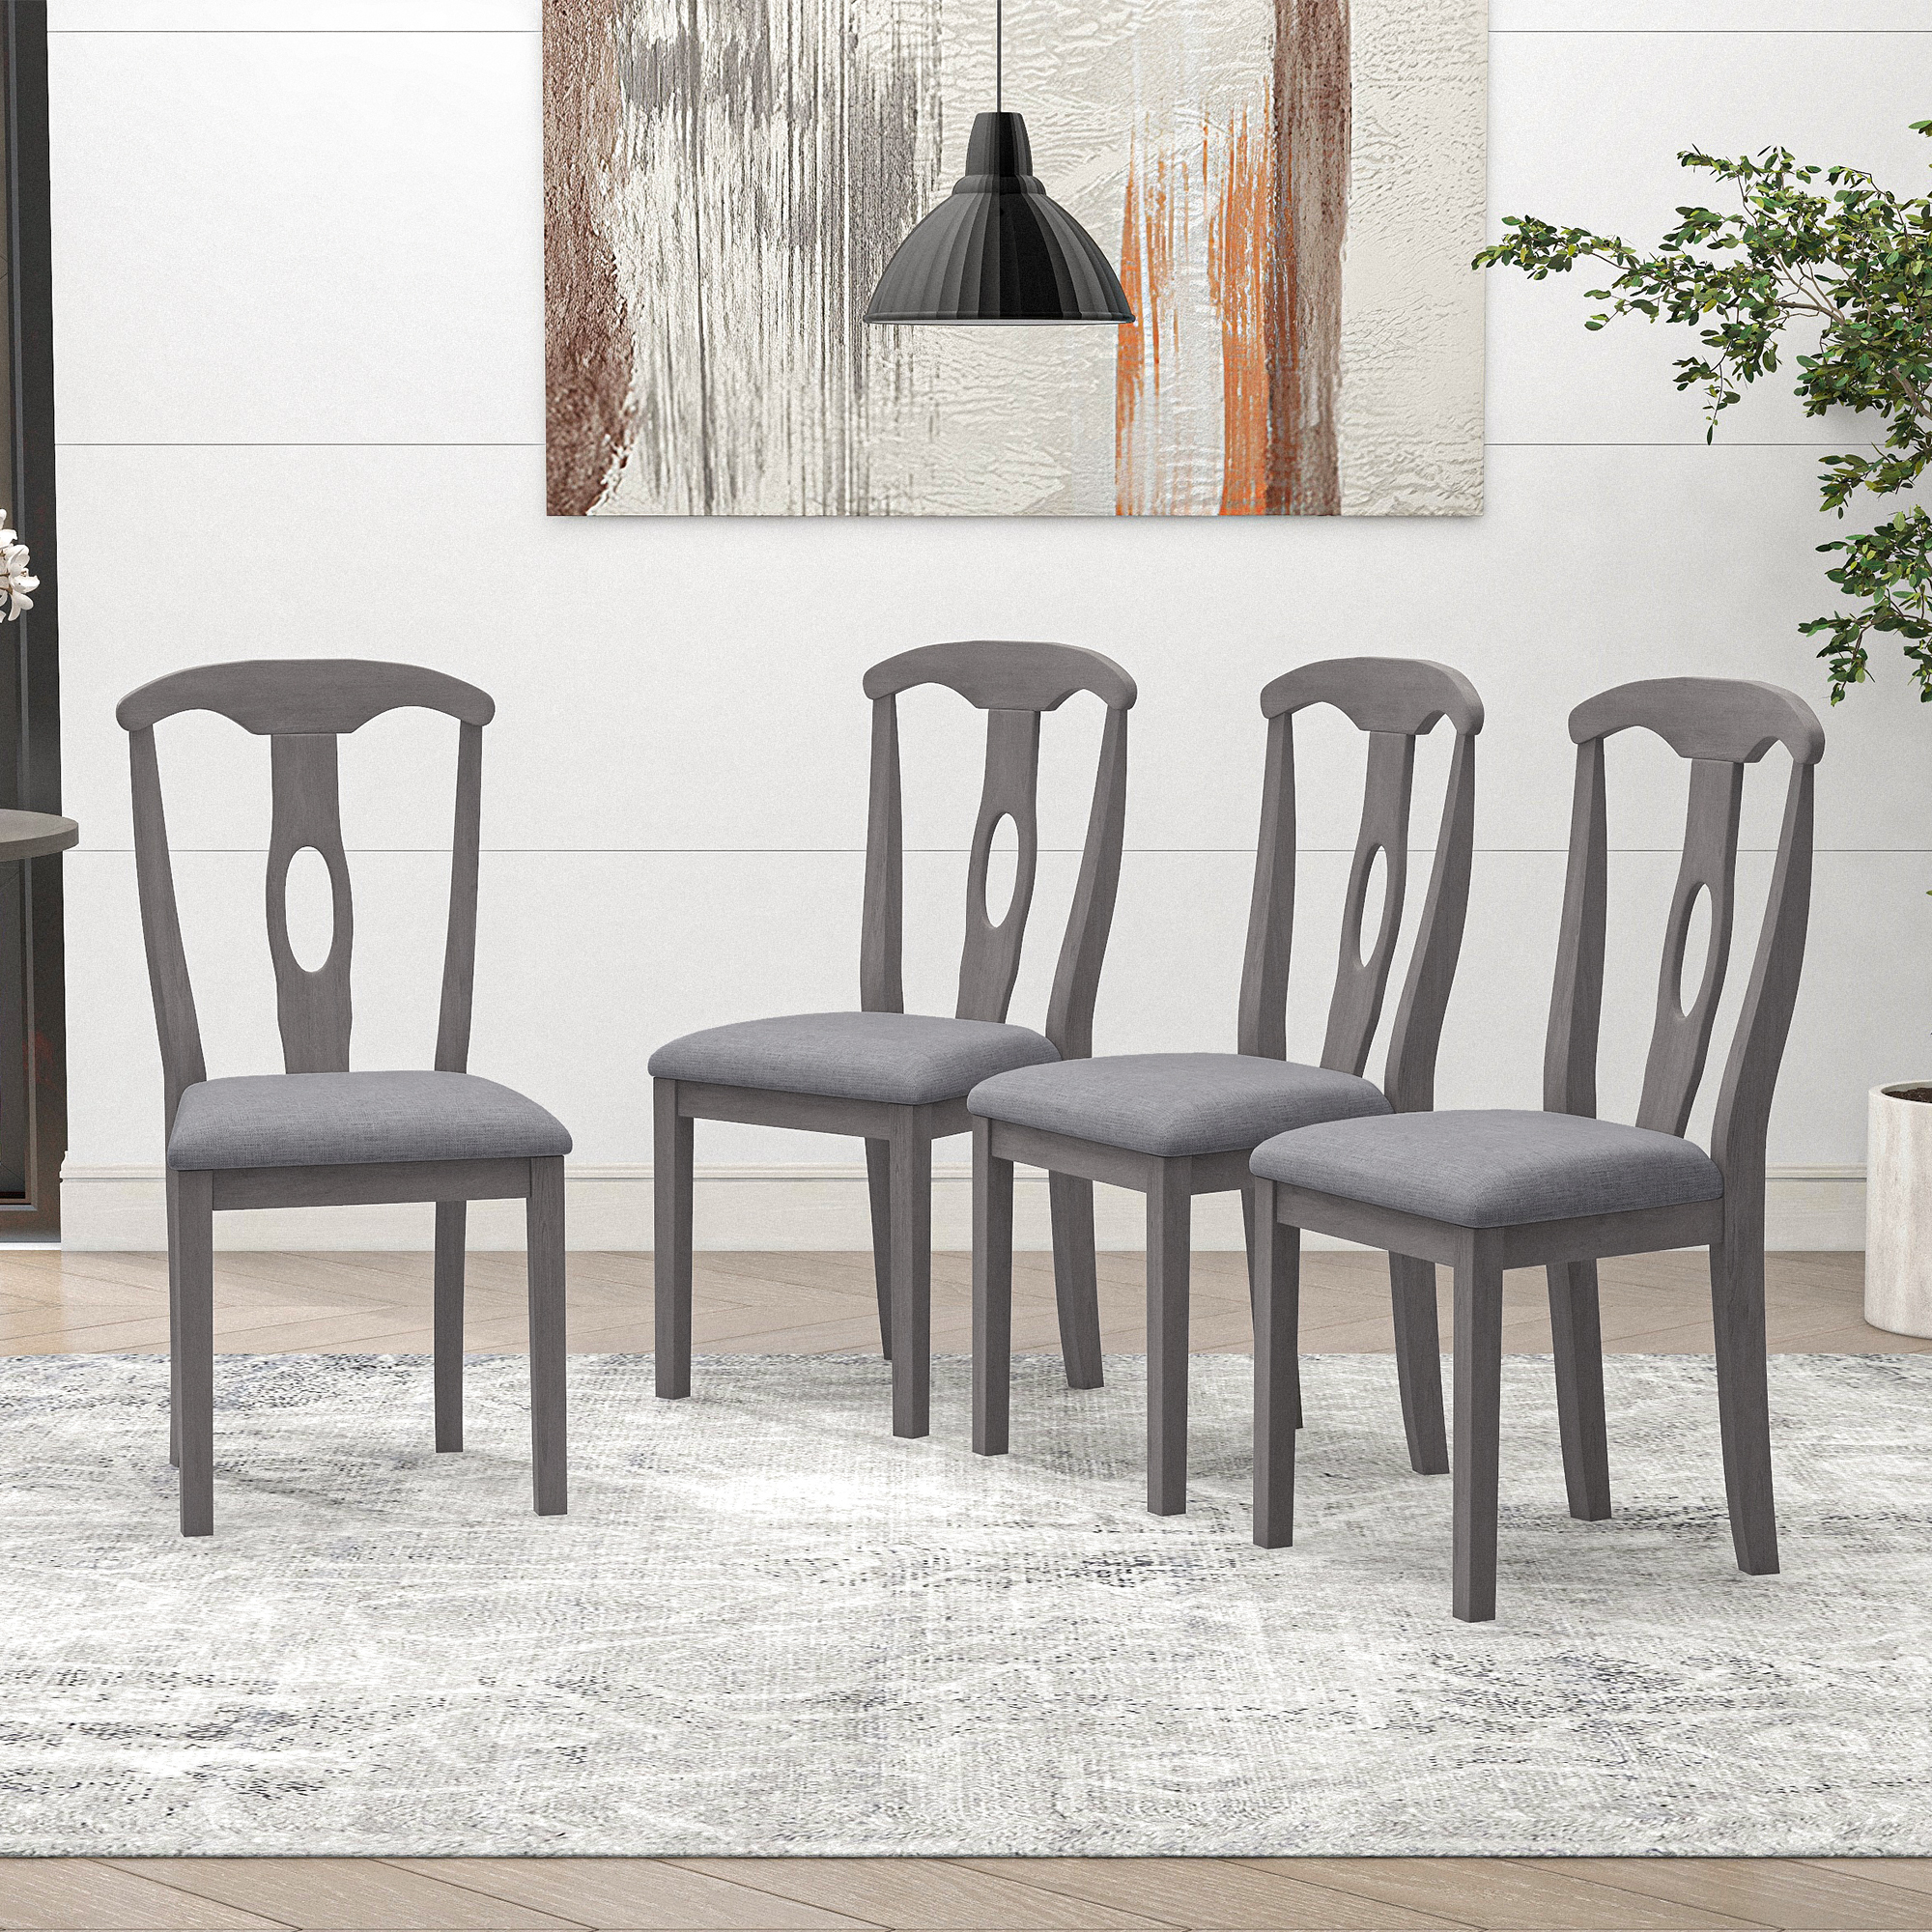 TOPMAX Rustic Wood Padded Dining Chairs for 4, Grey